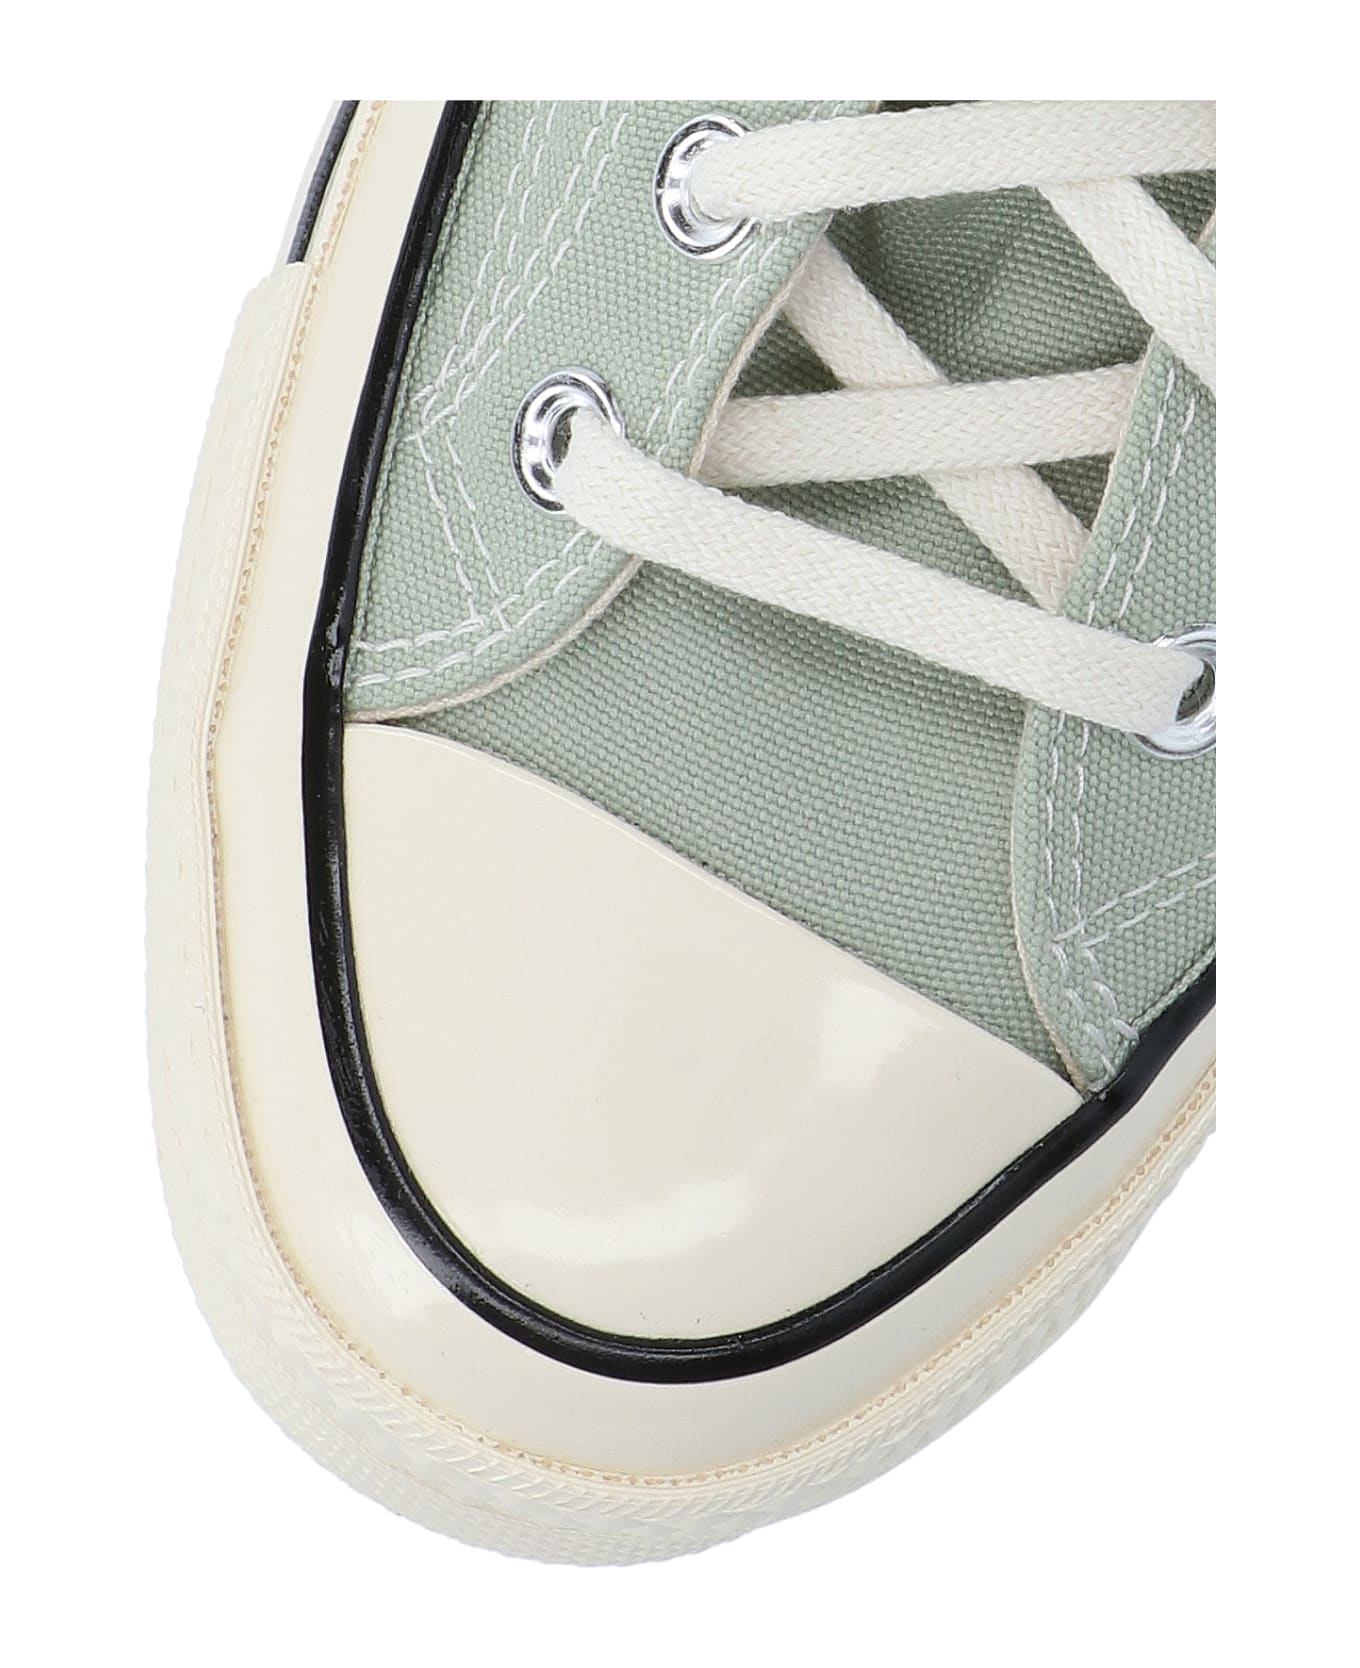 Converse 'chunk 70 Vintage Canvas' Sneakers - Green